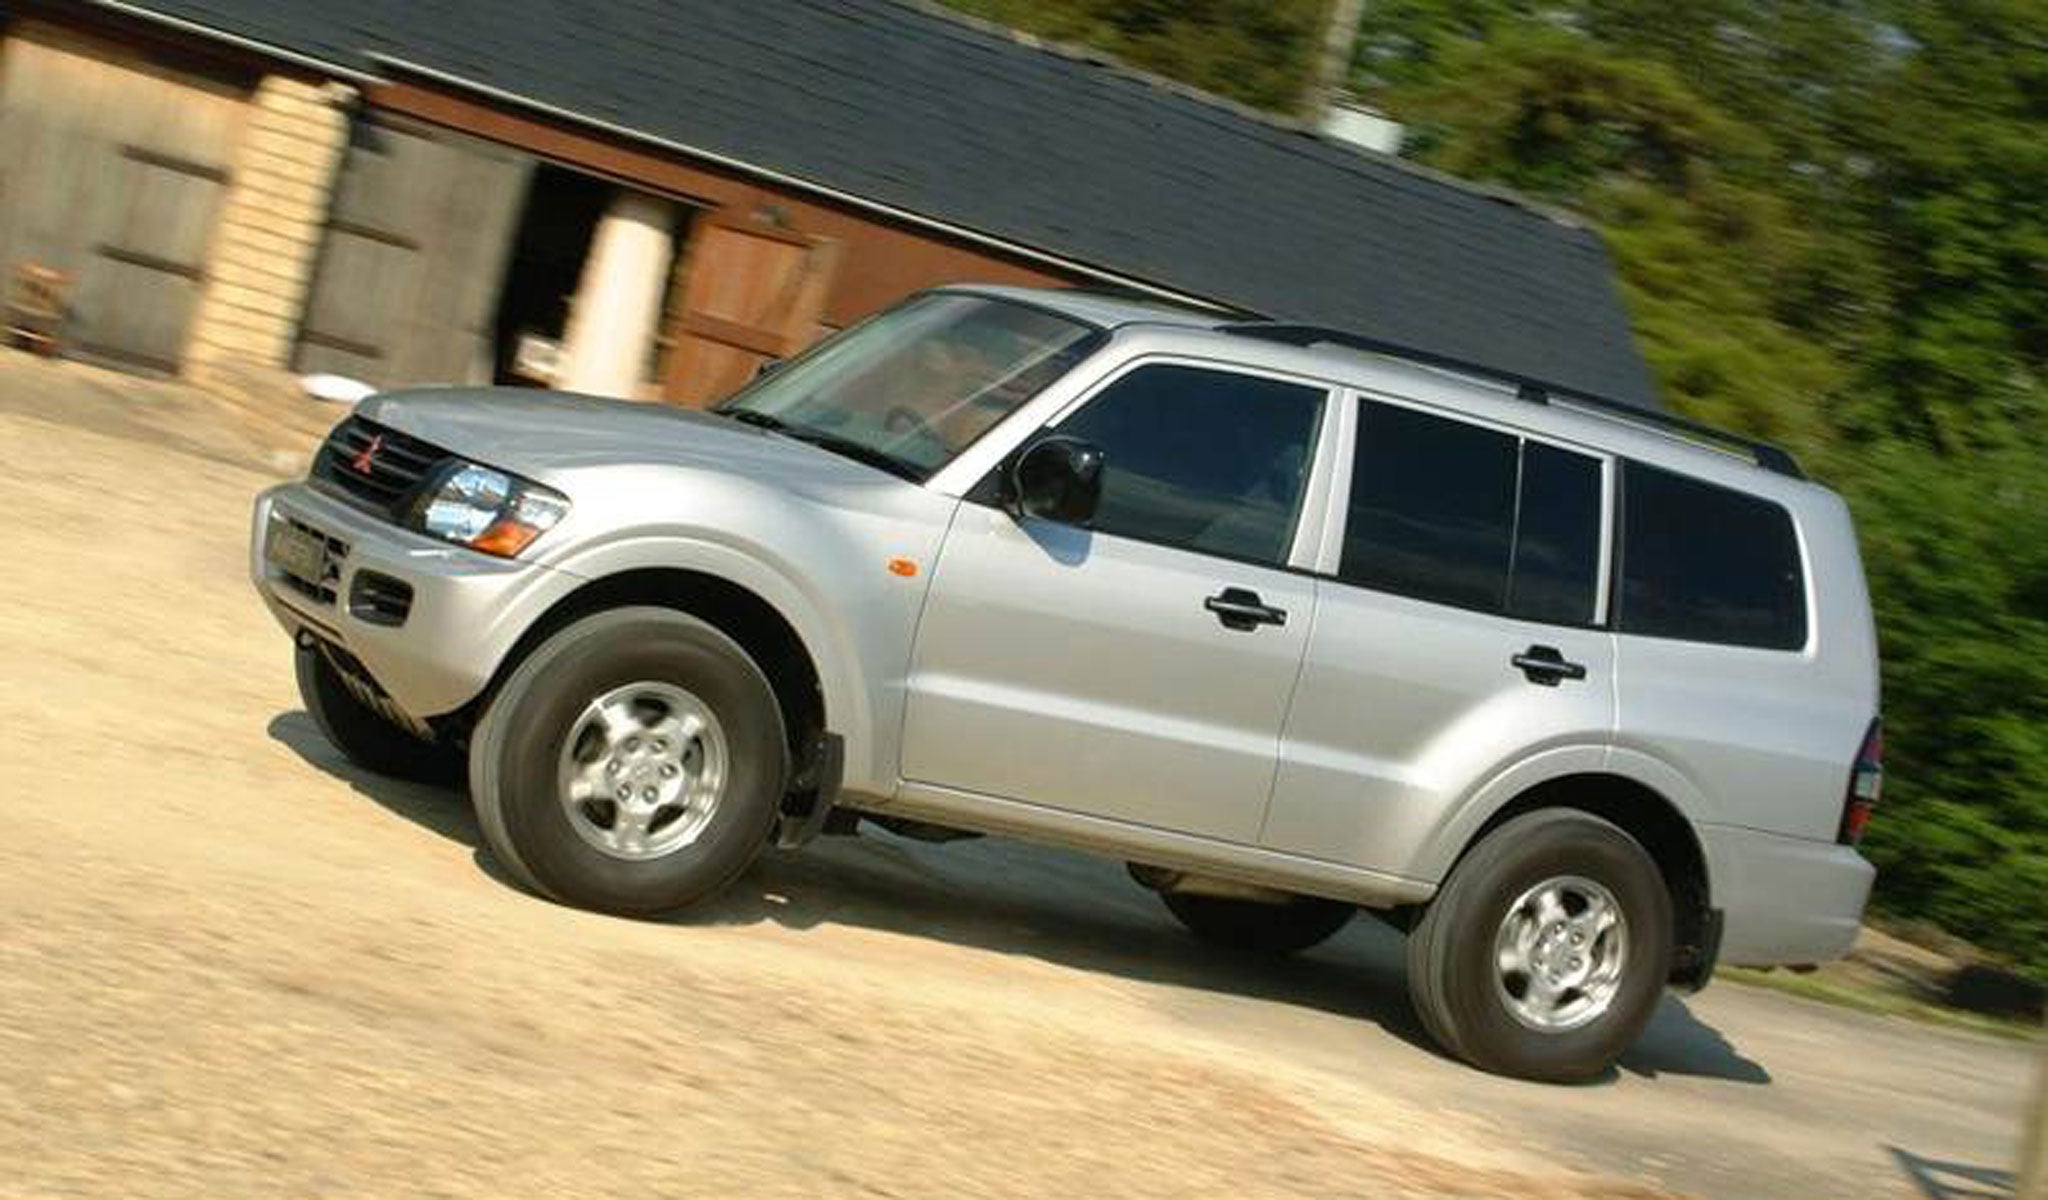 The Mitsubishi Shogun is tough, well built and very capable